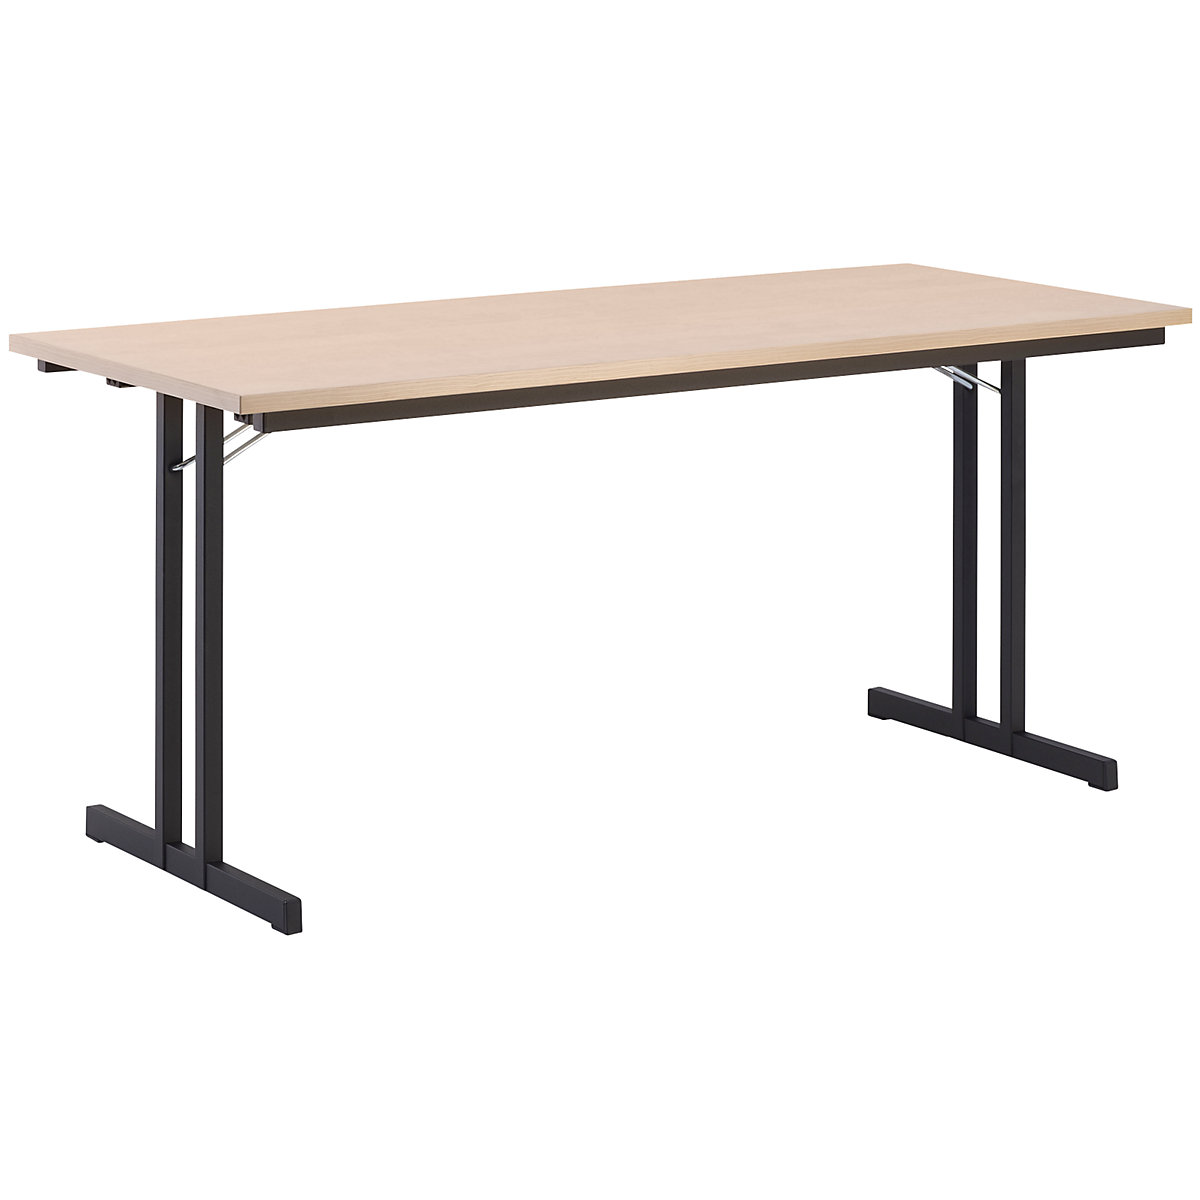 Folding table, with extra thick tabletop, height 720 mm, 1600 x 700 mm, black frame, maple finish tabletop-6